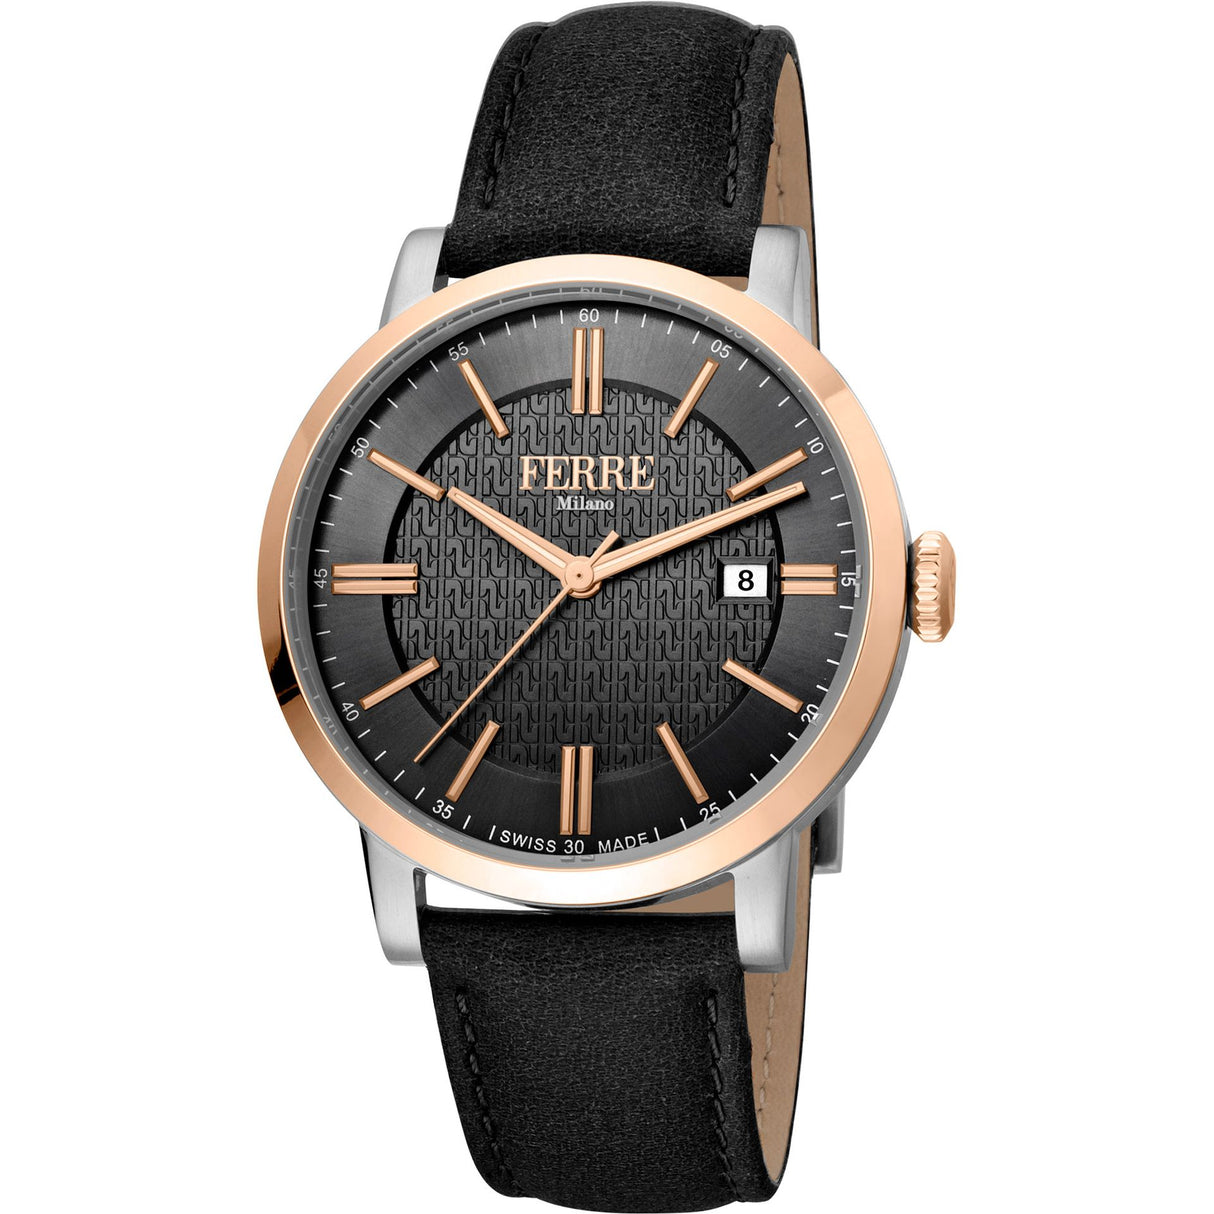 Ferrè Milano Gent watch Men's watch Quartz watch Analog watch Date watch Stainless steel watch Rose gold watch Black dial watch Leather strap watch Swiss-made movement Fashion watch Sophisticated watch Bold watch Statement piece Warm and cool toned contrast Masculine aesthetic